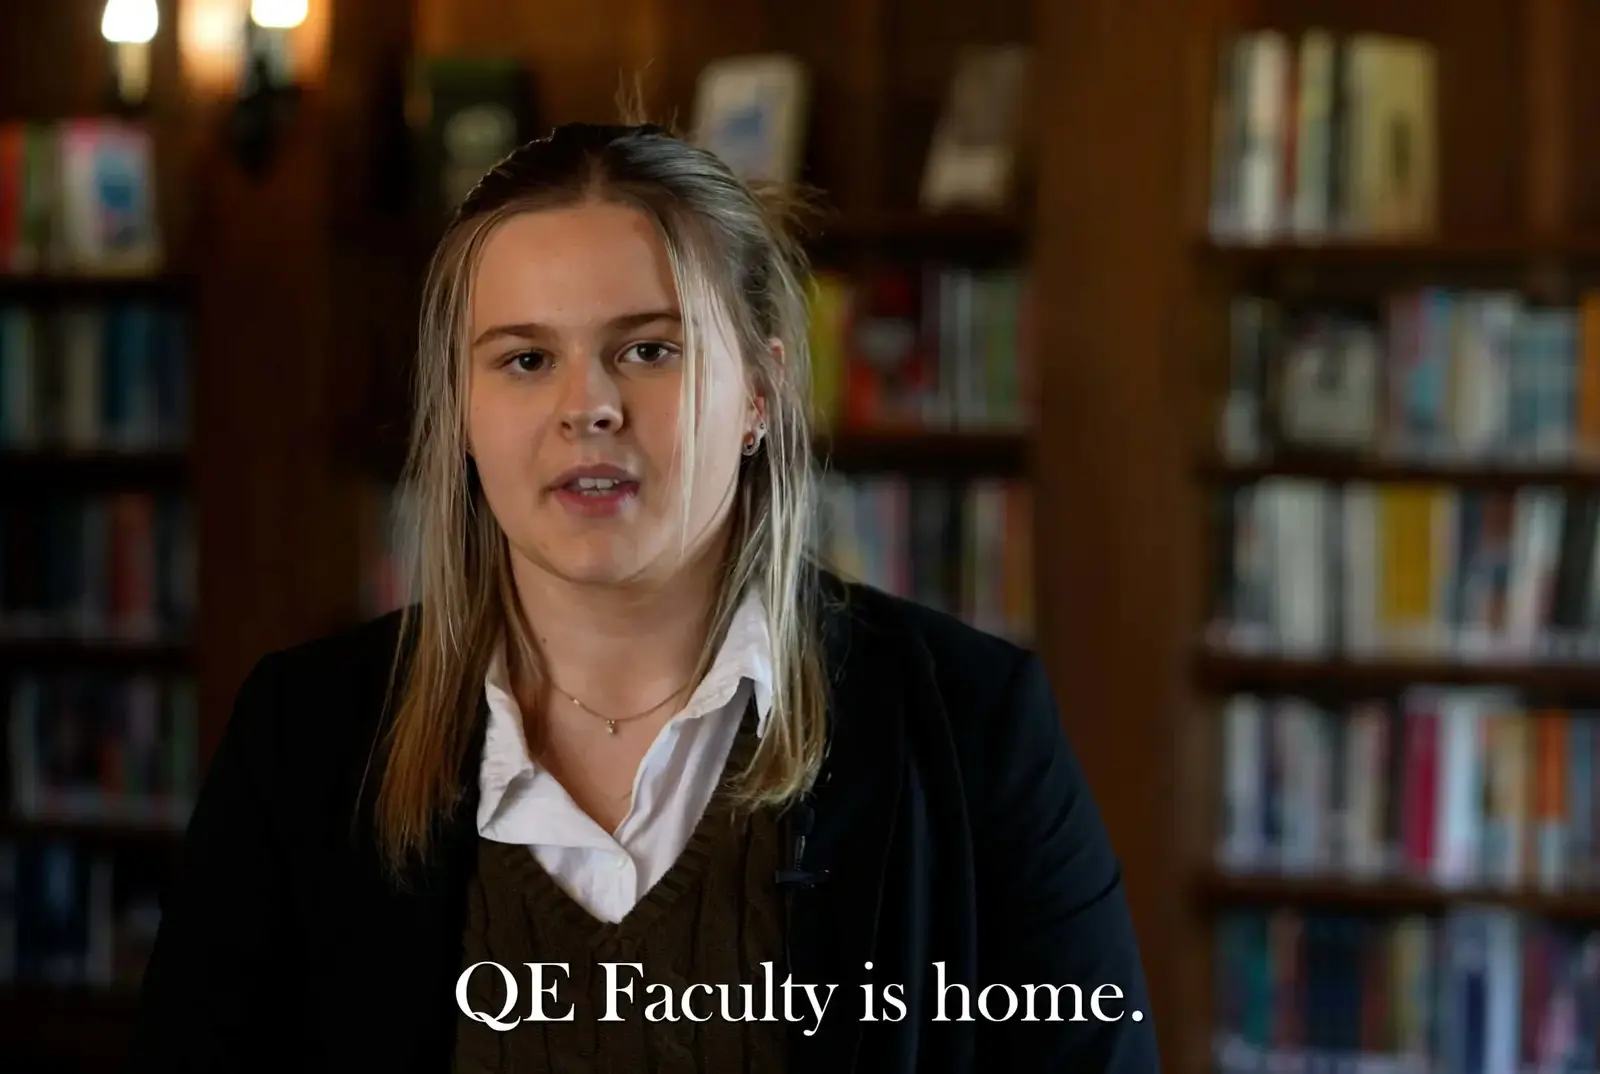 Female student talks about why she loves The Faculty of Queen Ethelburga's.